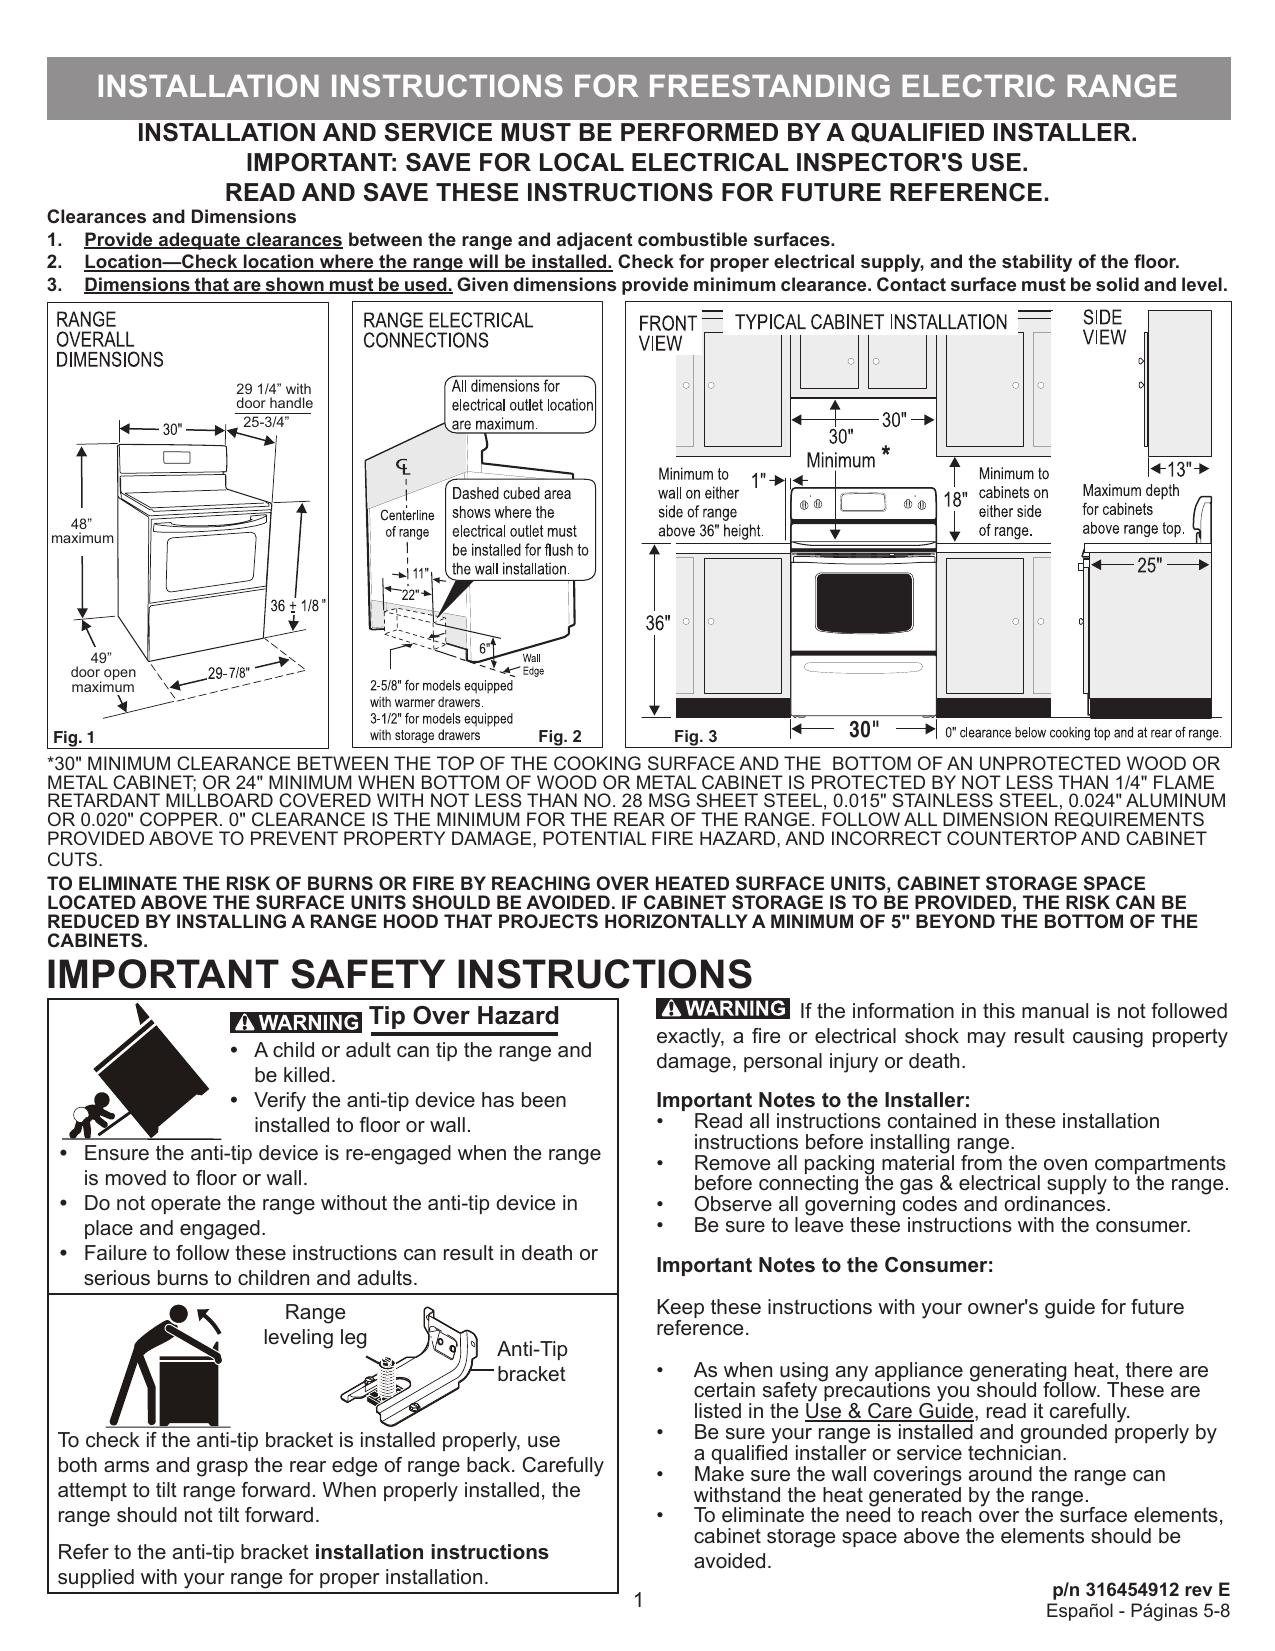 Important Safety instructions ul online iportant Note